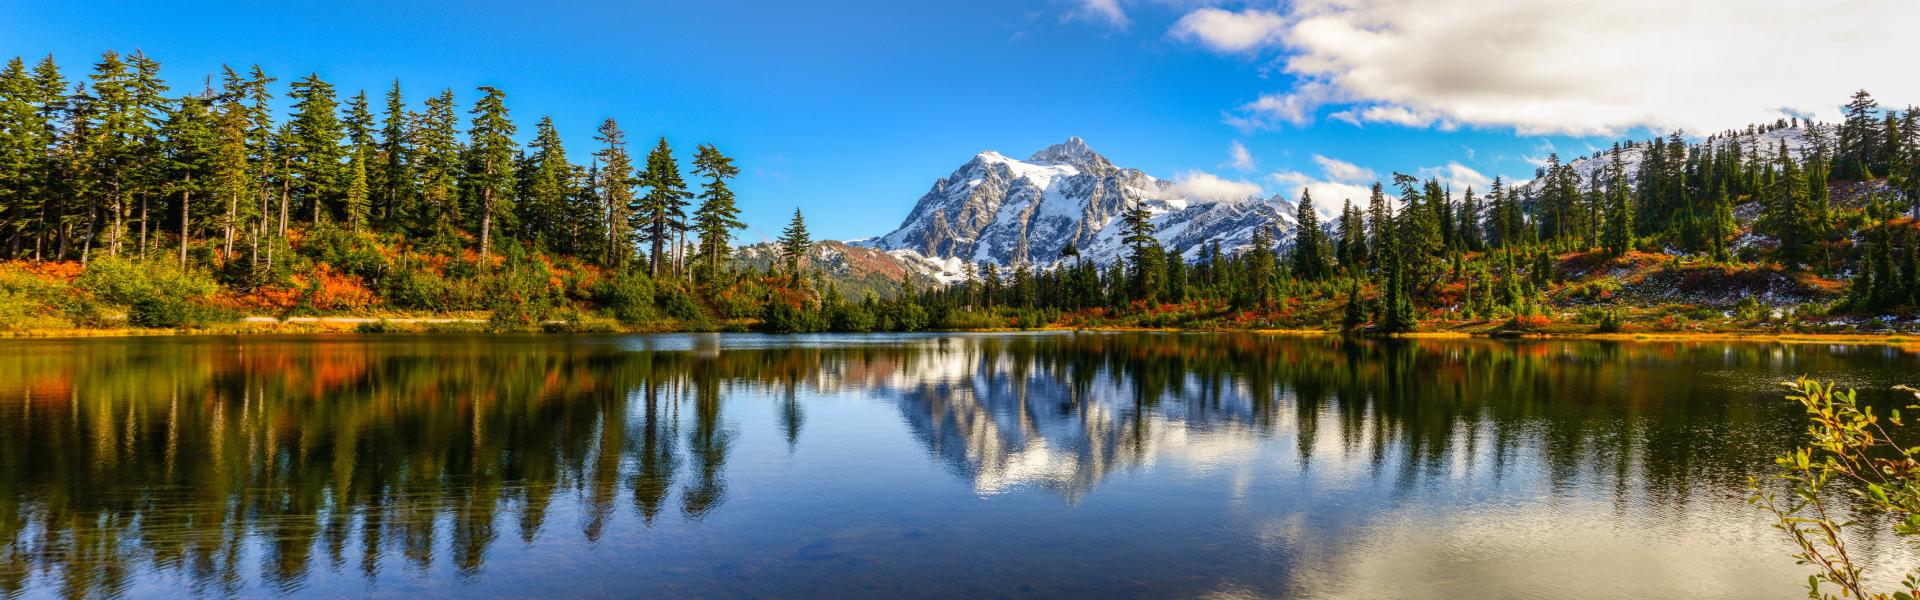 Lodging & Cabins in Snoqualmie Pass - HomeToGo